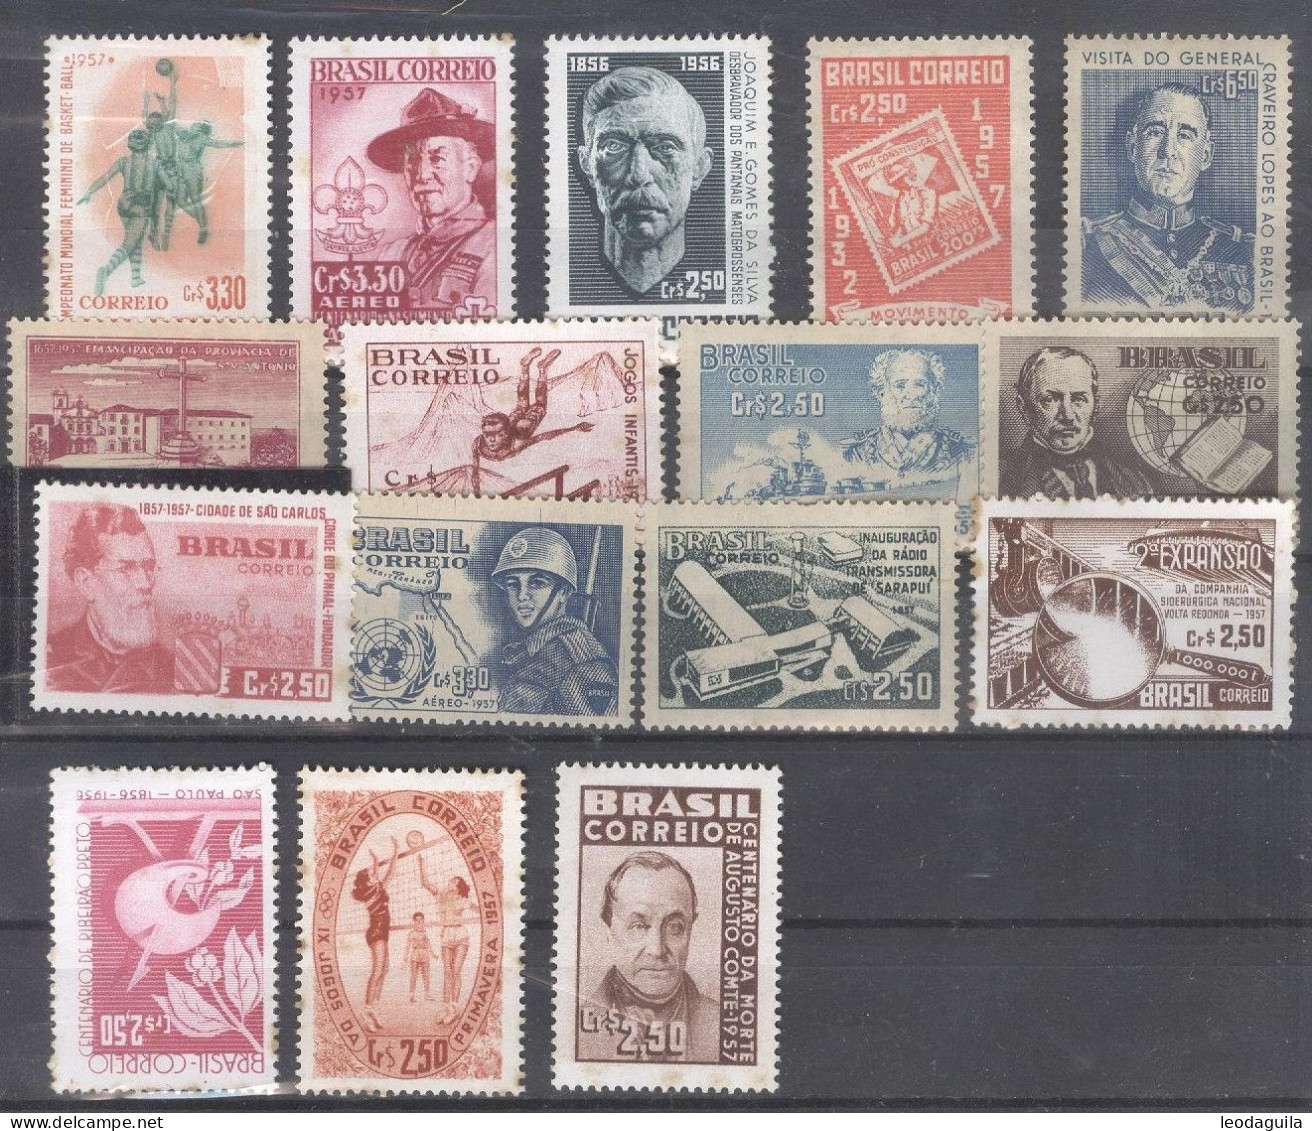 BRAZIL 1957   FULL YEAR COLLECTION  - 16 COMMEMORATIVES STAMPS  MINT - Full Years